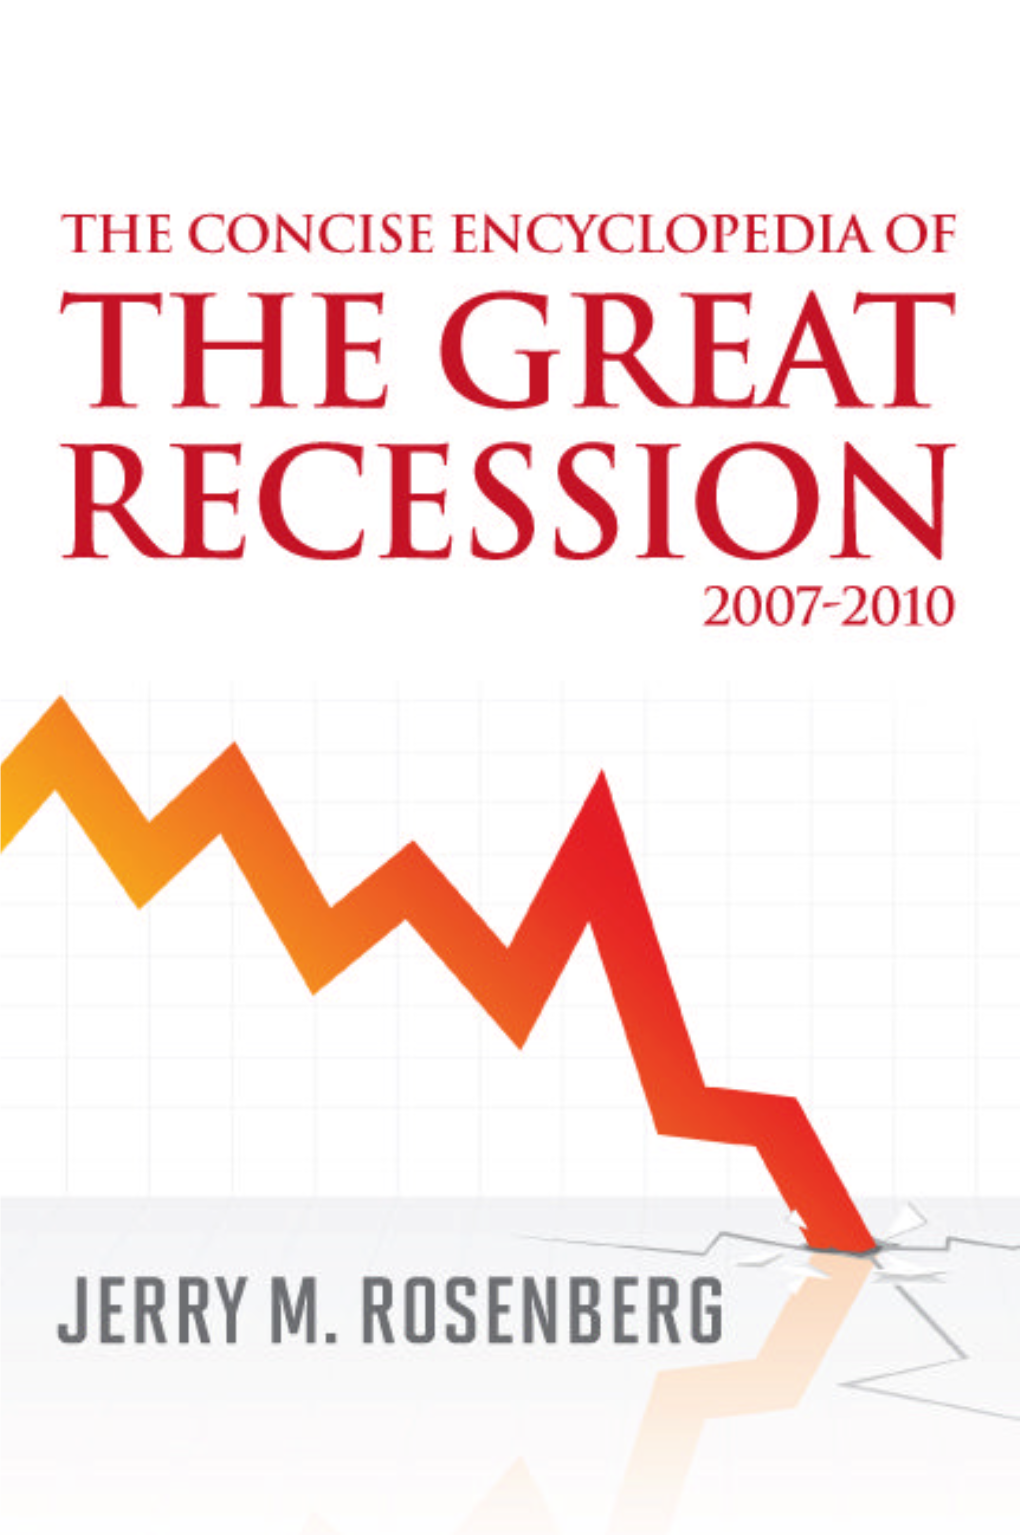 Concise Encyclopedia of the Great Recession, 2007-2010